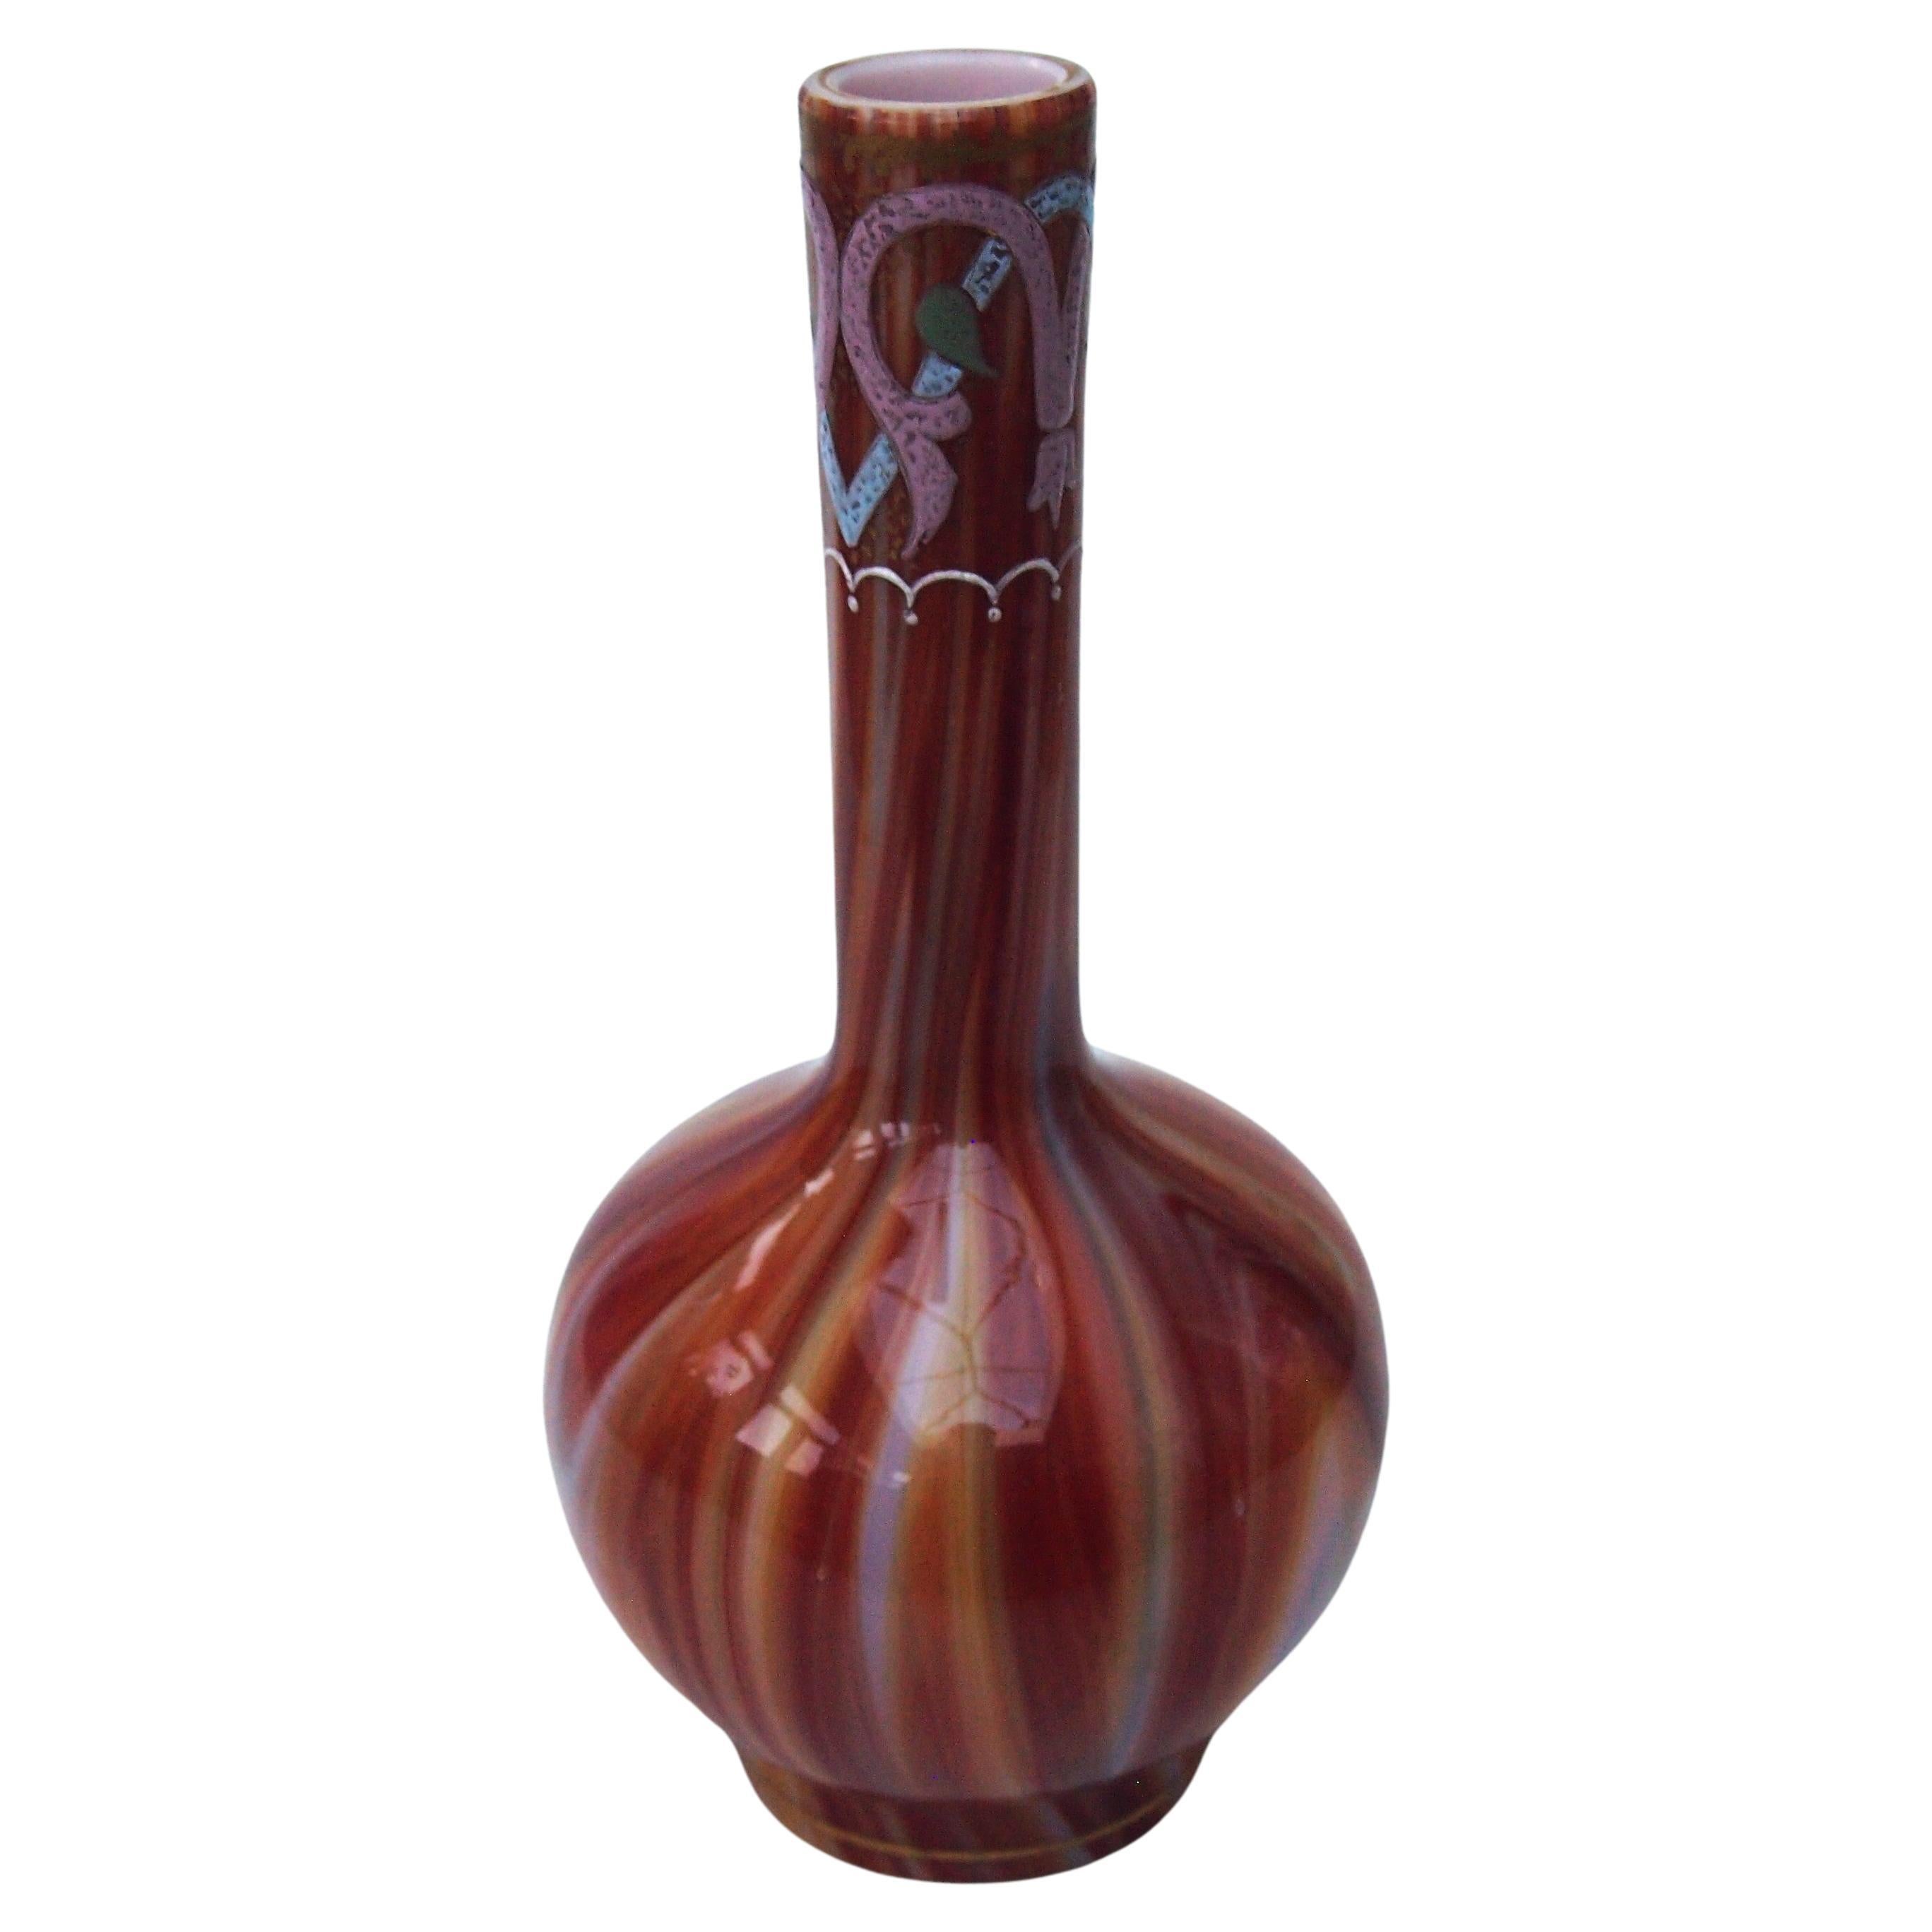 Classic Loetz Early Glass 'Onyx' Pattern Vase c1887 made for Islamic market For Sale